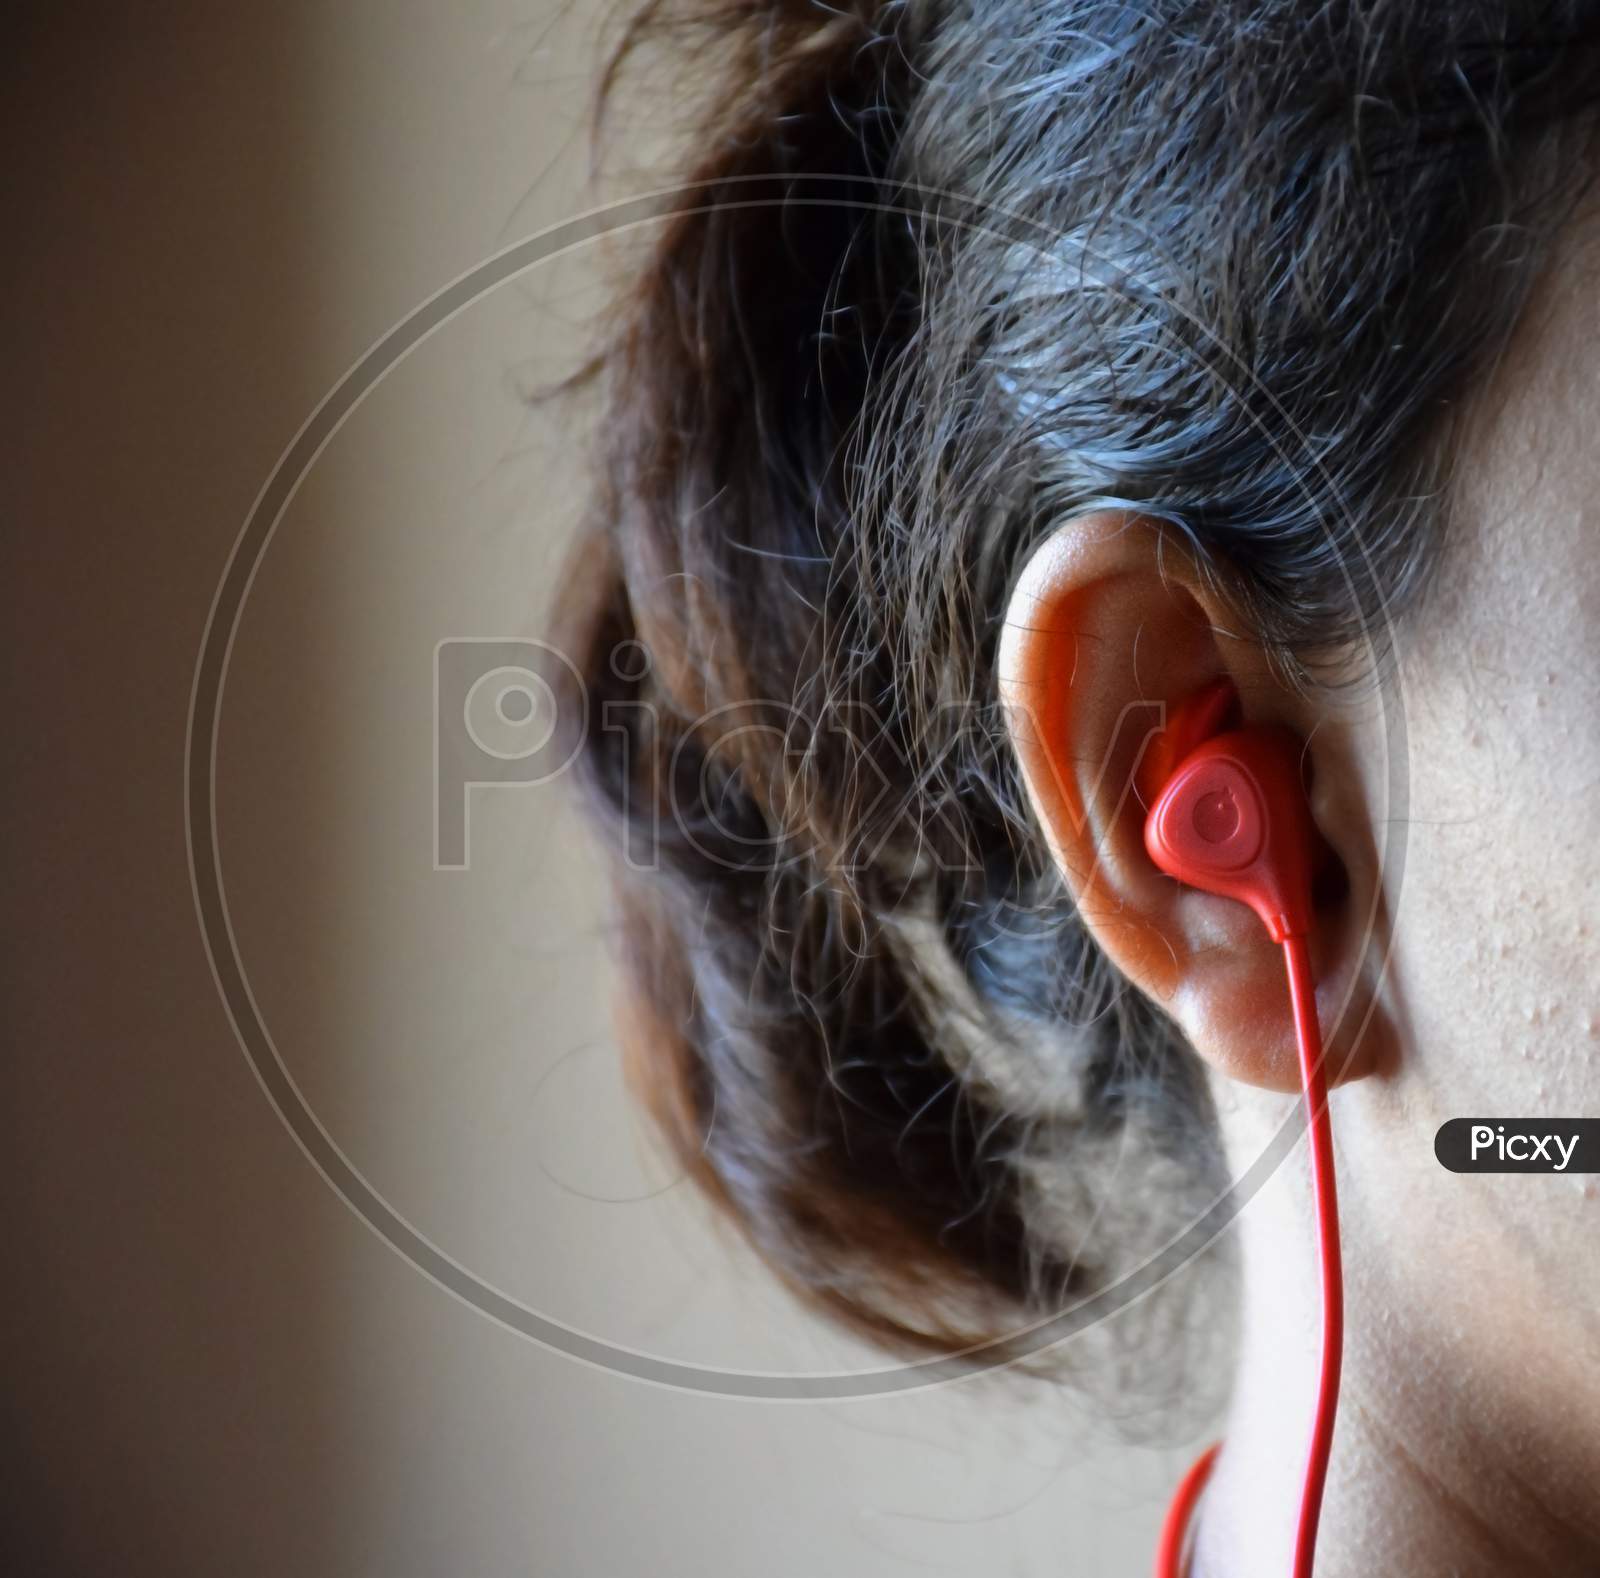 Picture Of An Indian Girl Who Wearing Red Color Earphone